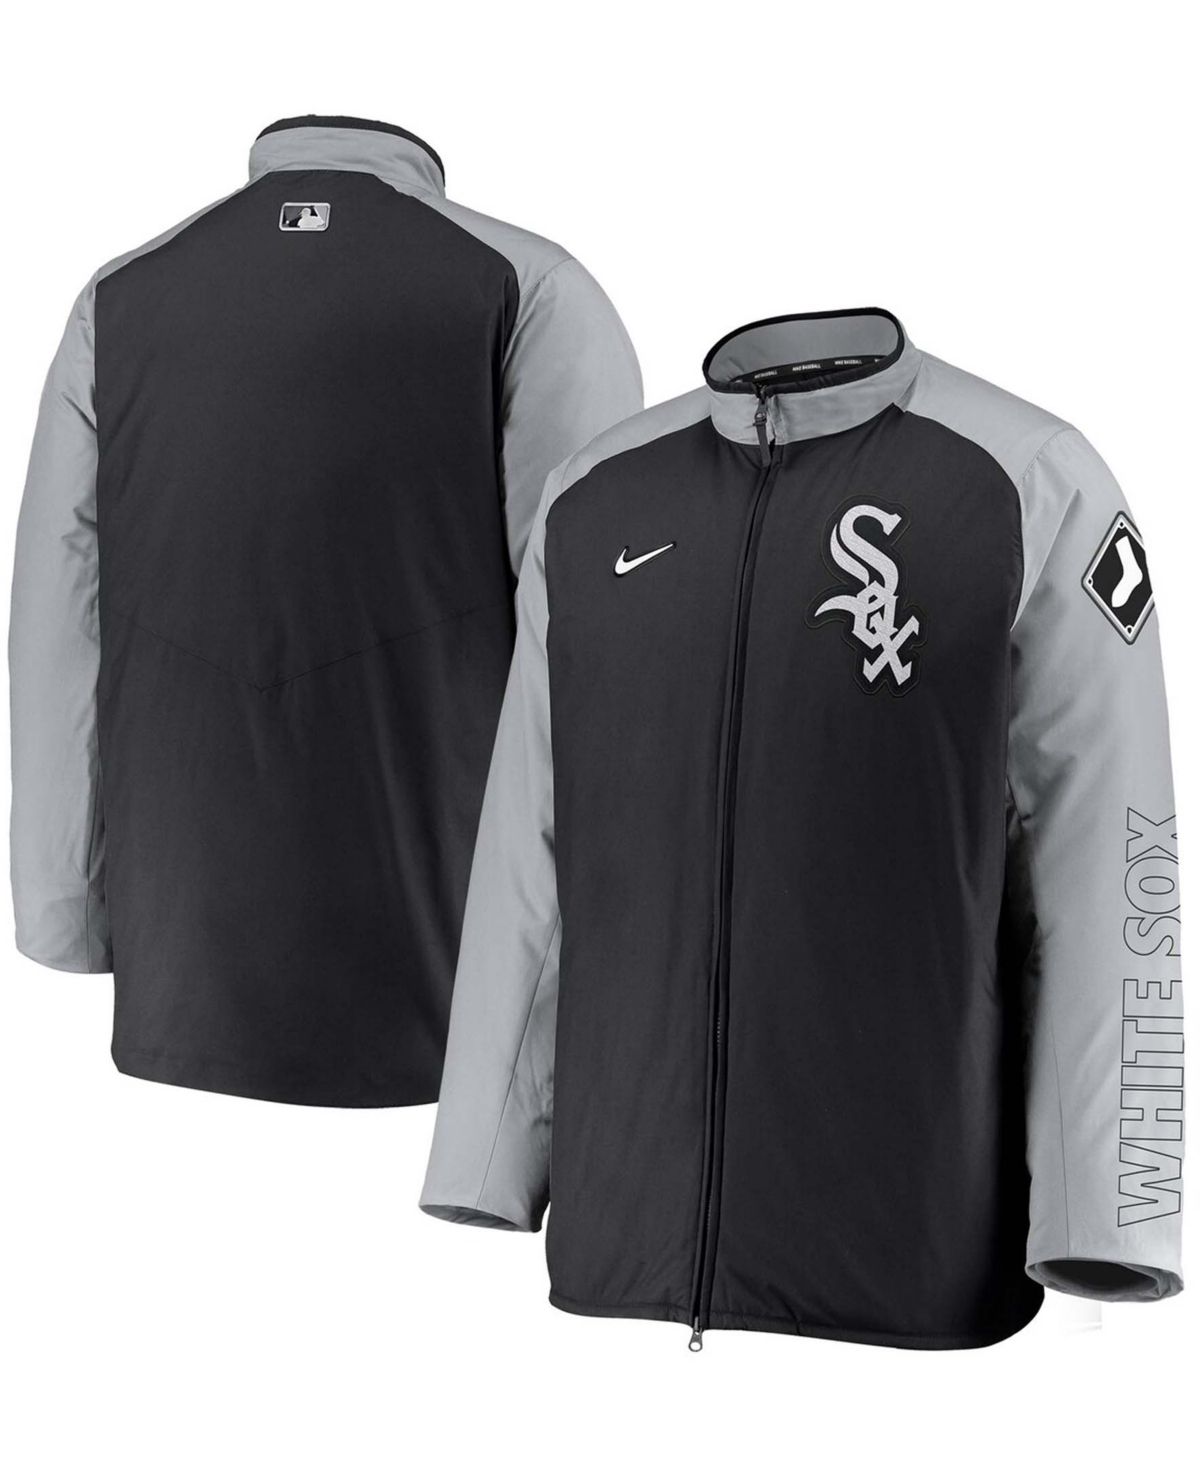 Men's Black Chicago White Sox Authentic Collection Dugout Full-Zip Jacket